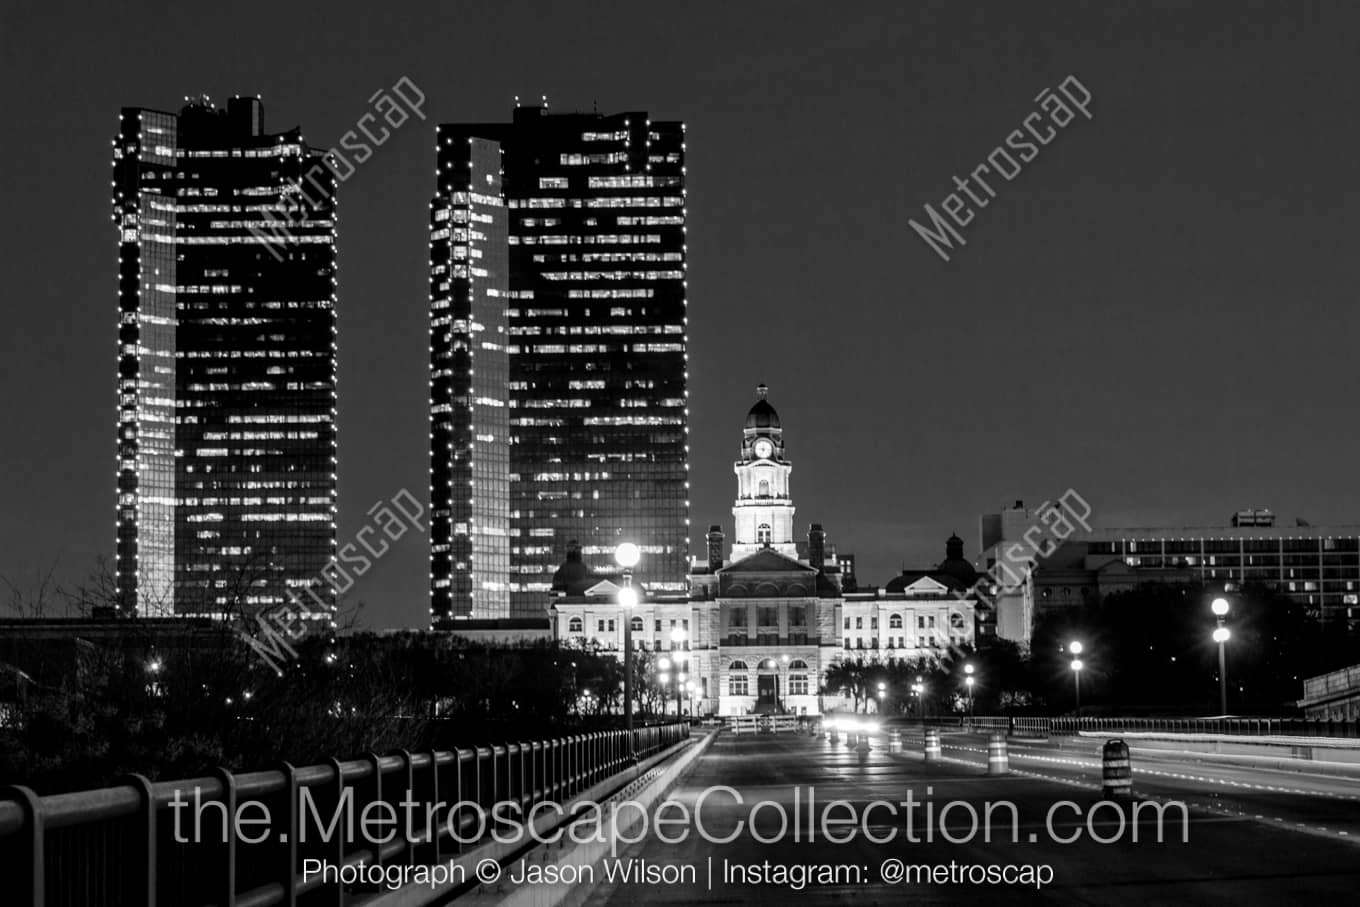 Fort Worth Texas Picture at Night